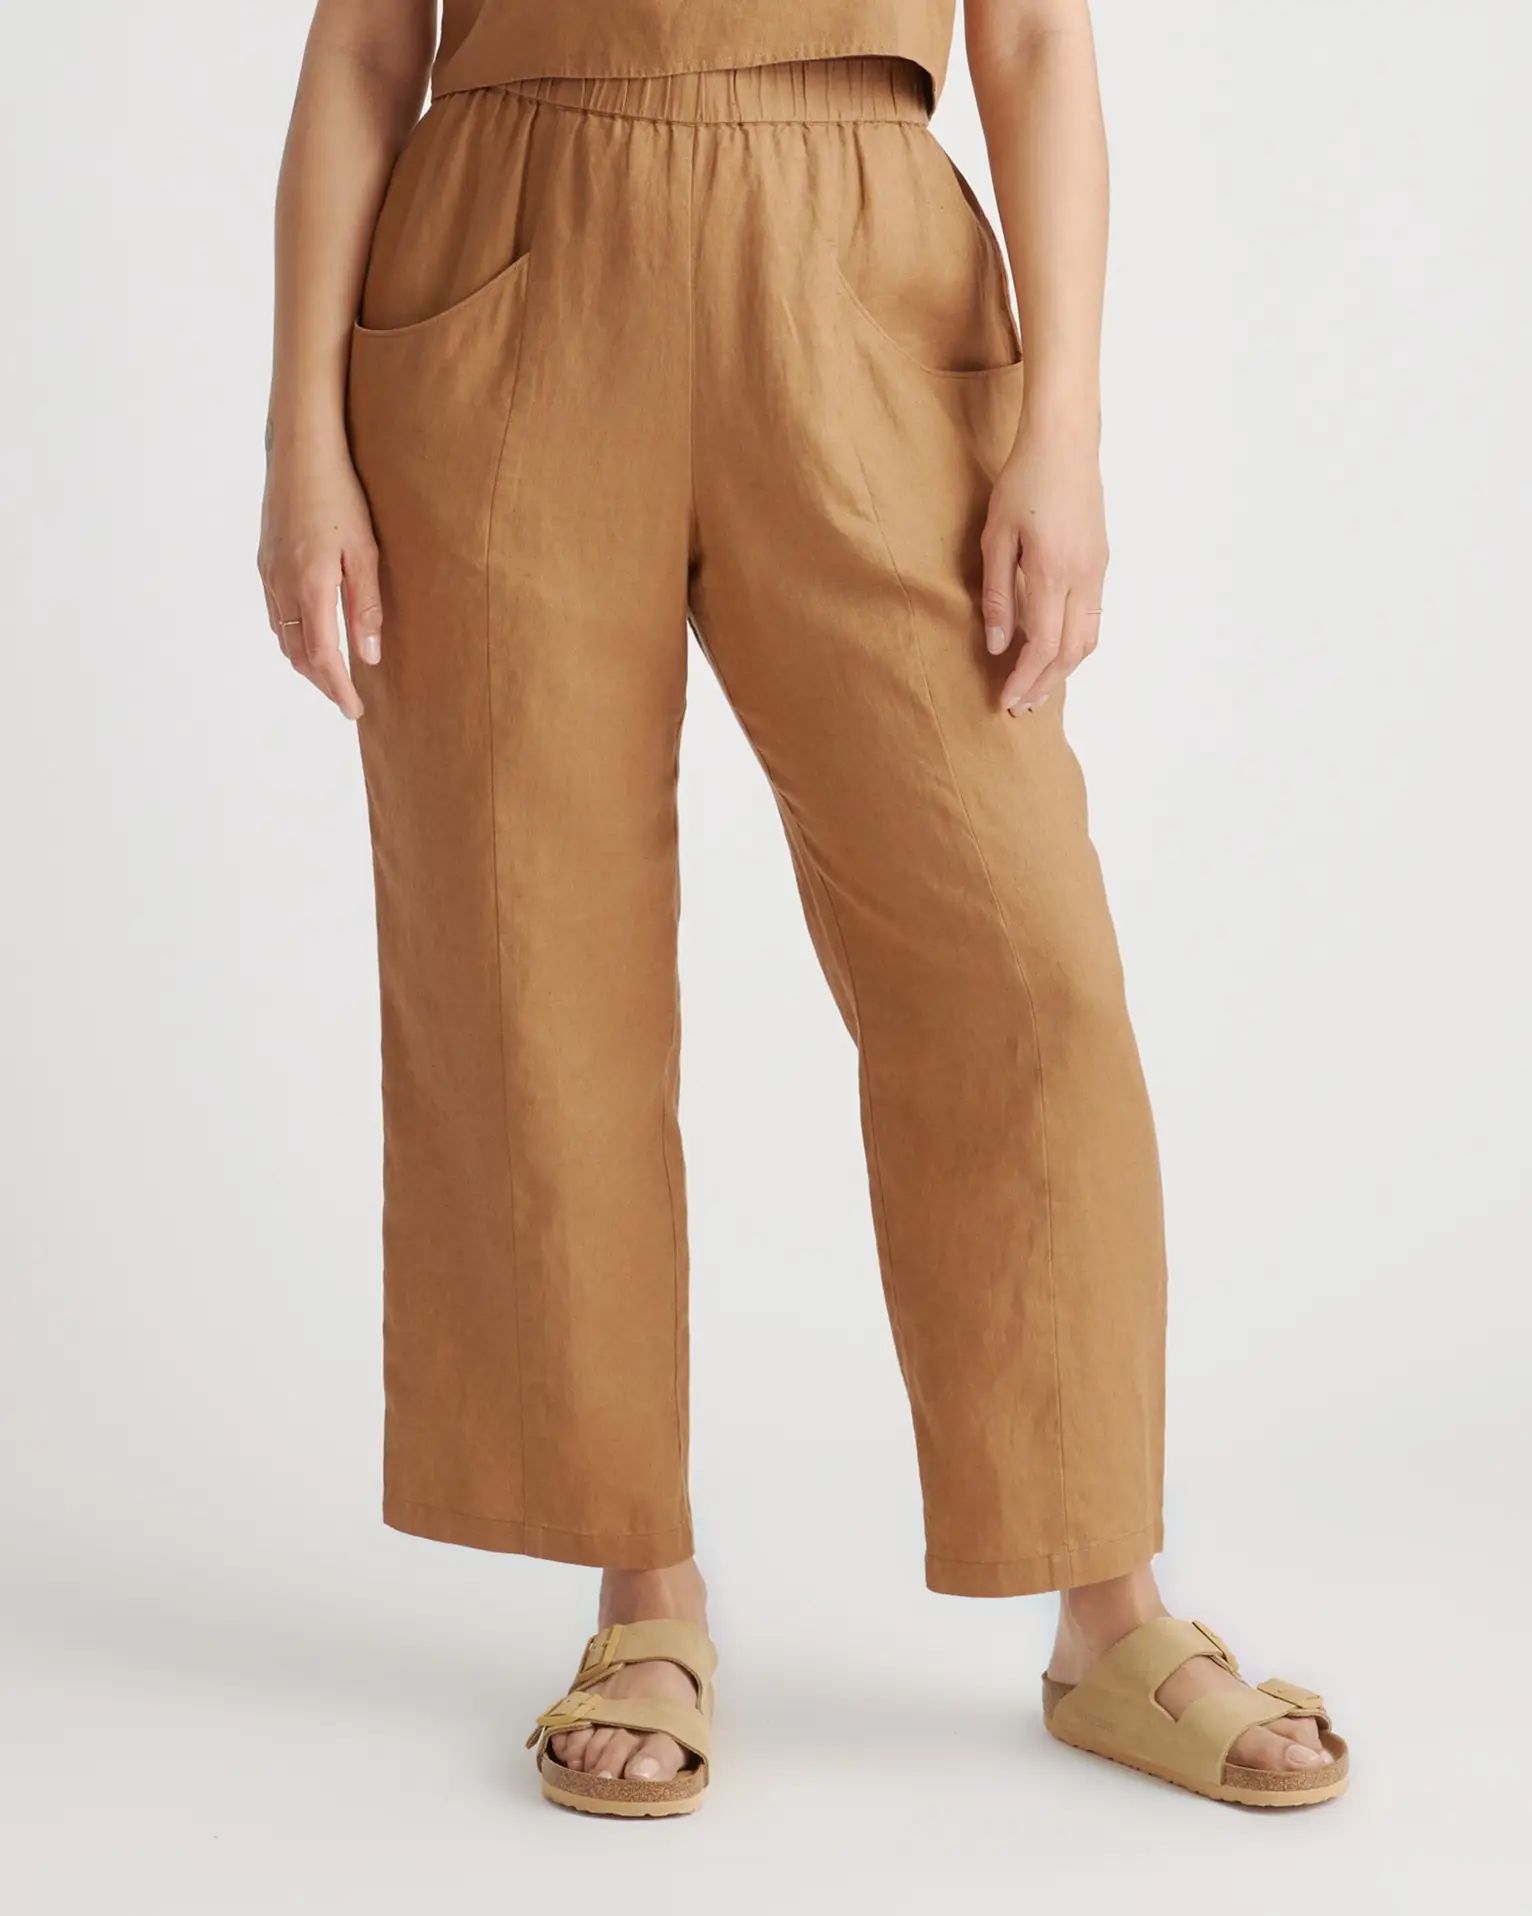 100% European Linen Tapered Ankle Pant | Quince